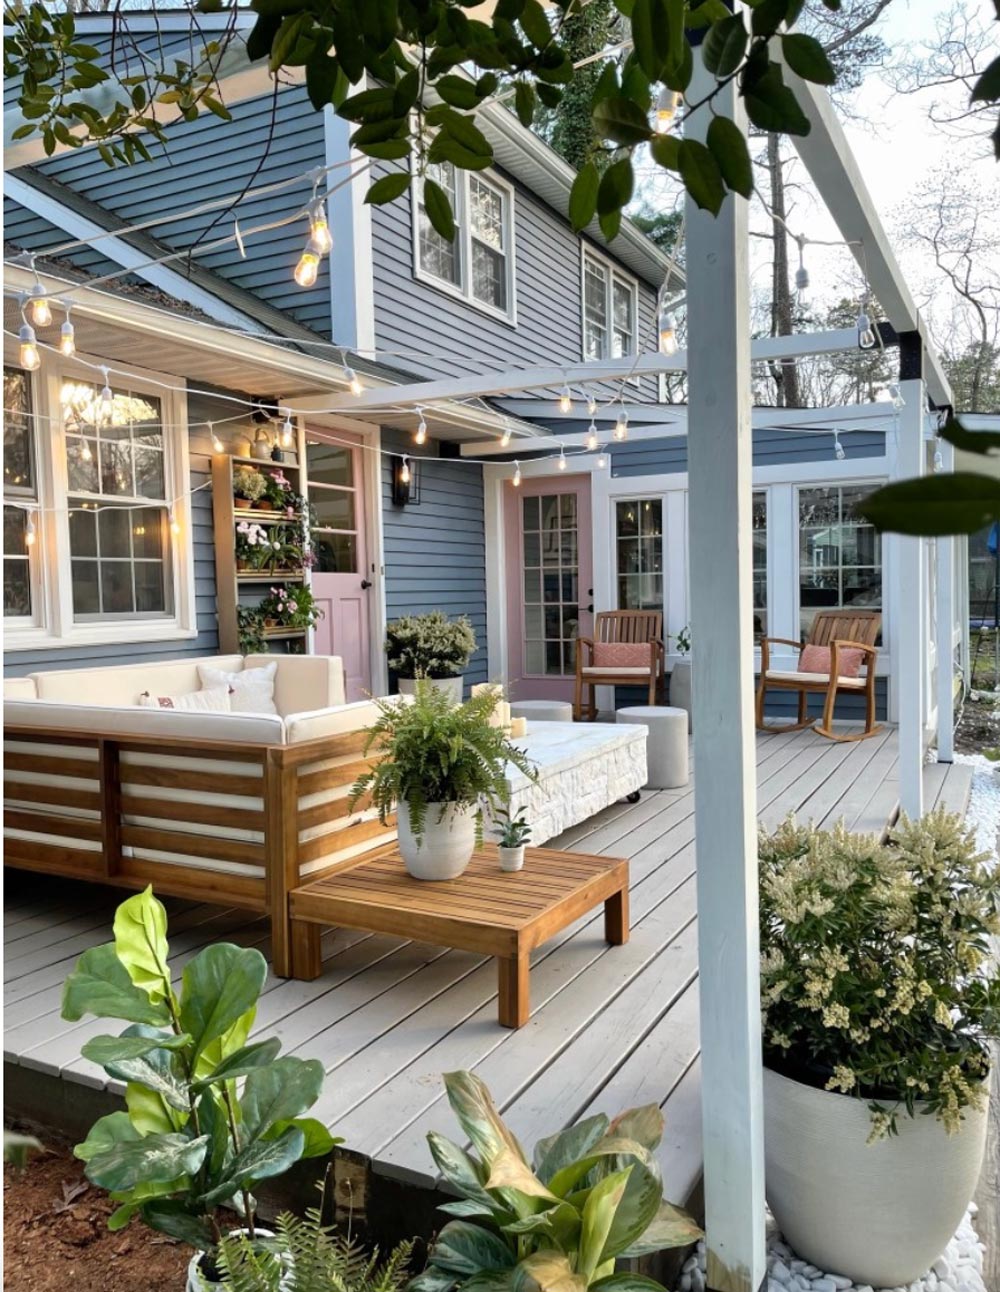 Blue house with updated wood deck with white pergola, pink doors, and white and light wood furniture.